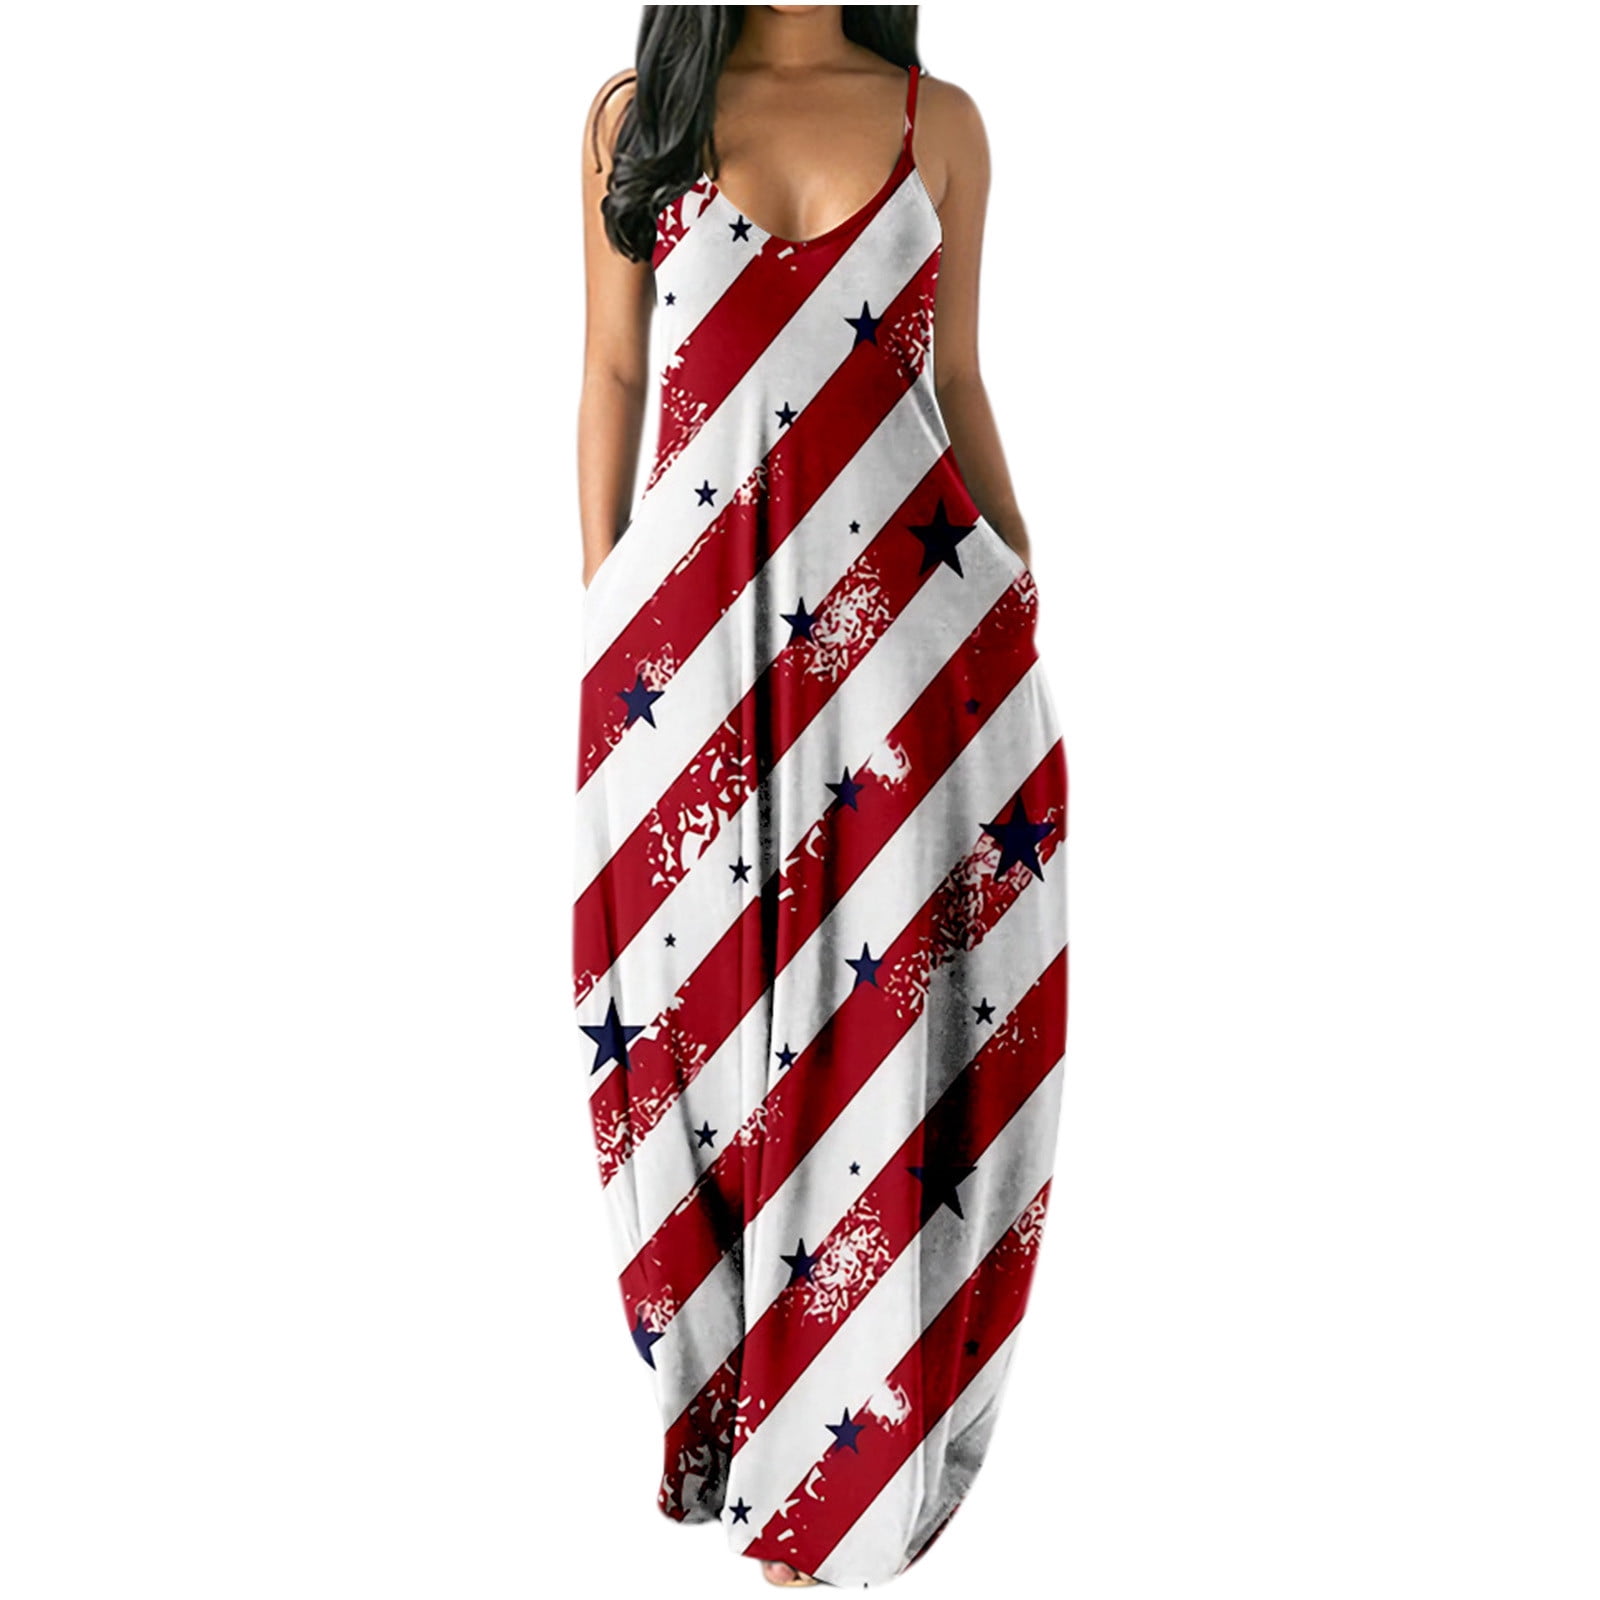 Mchoice 4th of July summer dress for women print sexy dresses plus size ...